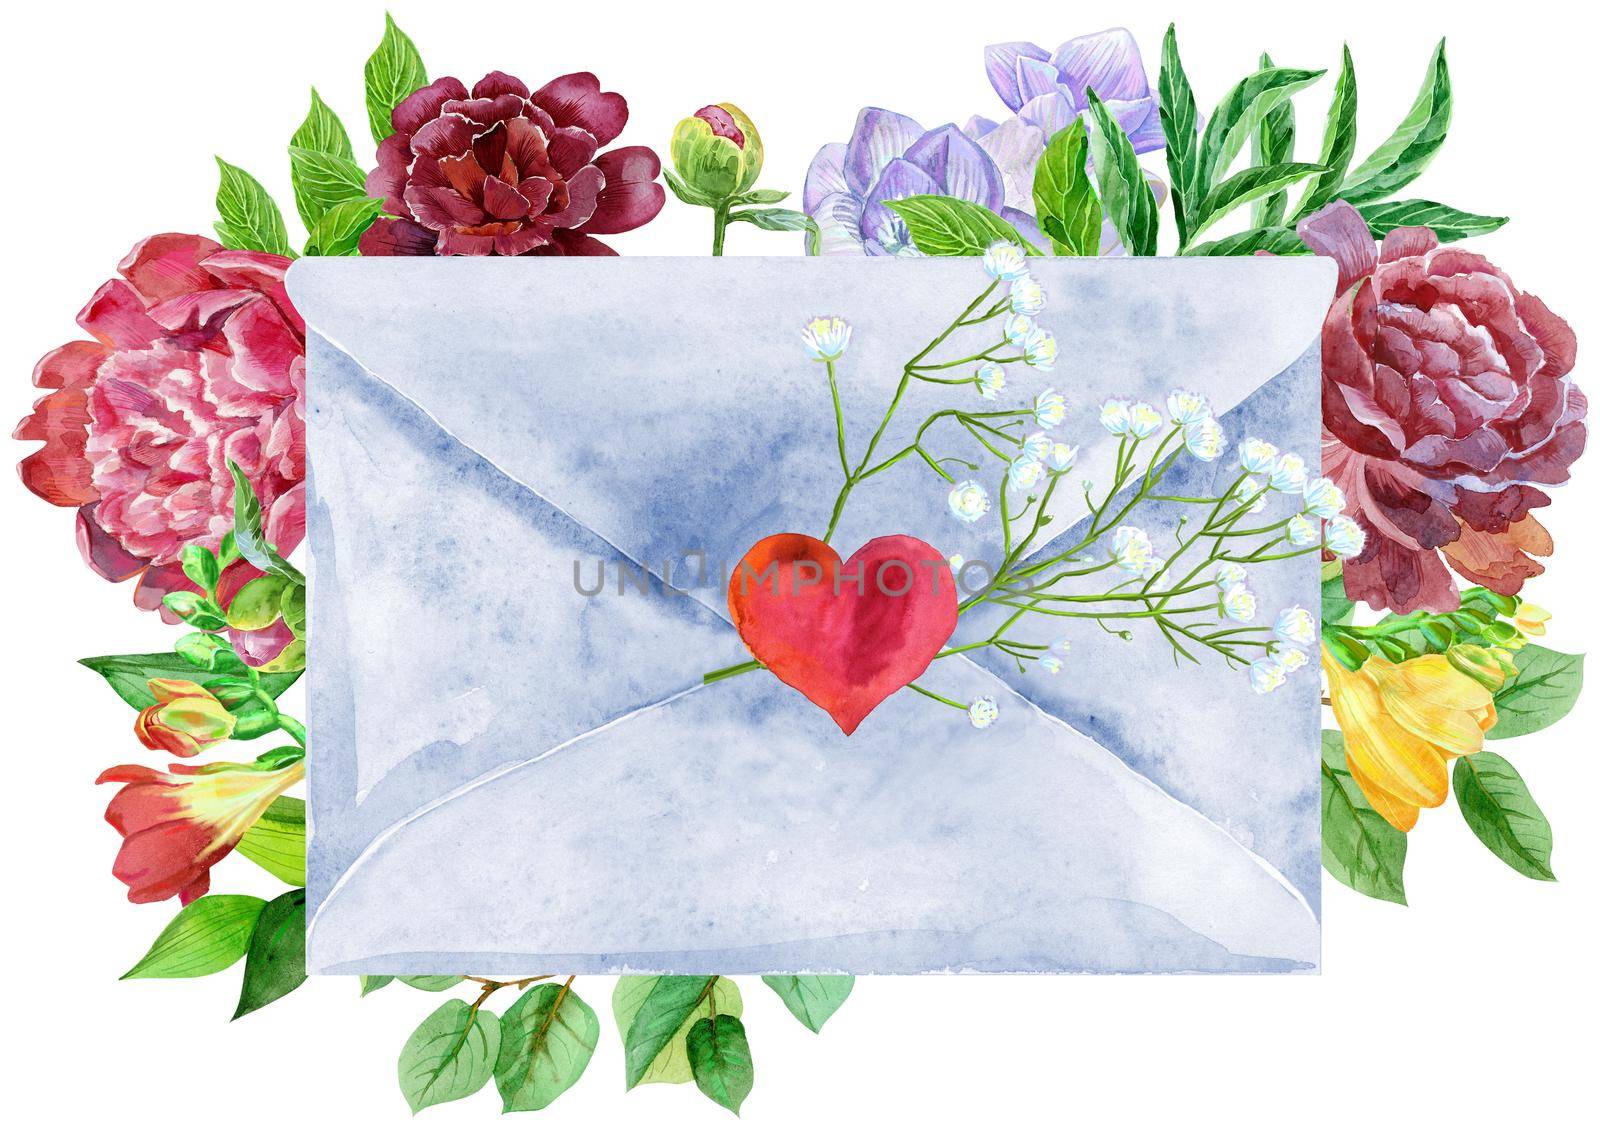 Envelope with heart and flowers, Love Letter Hearts Romance. watercolor illustration isolated on white background. by NataOmsk